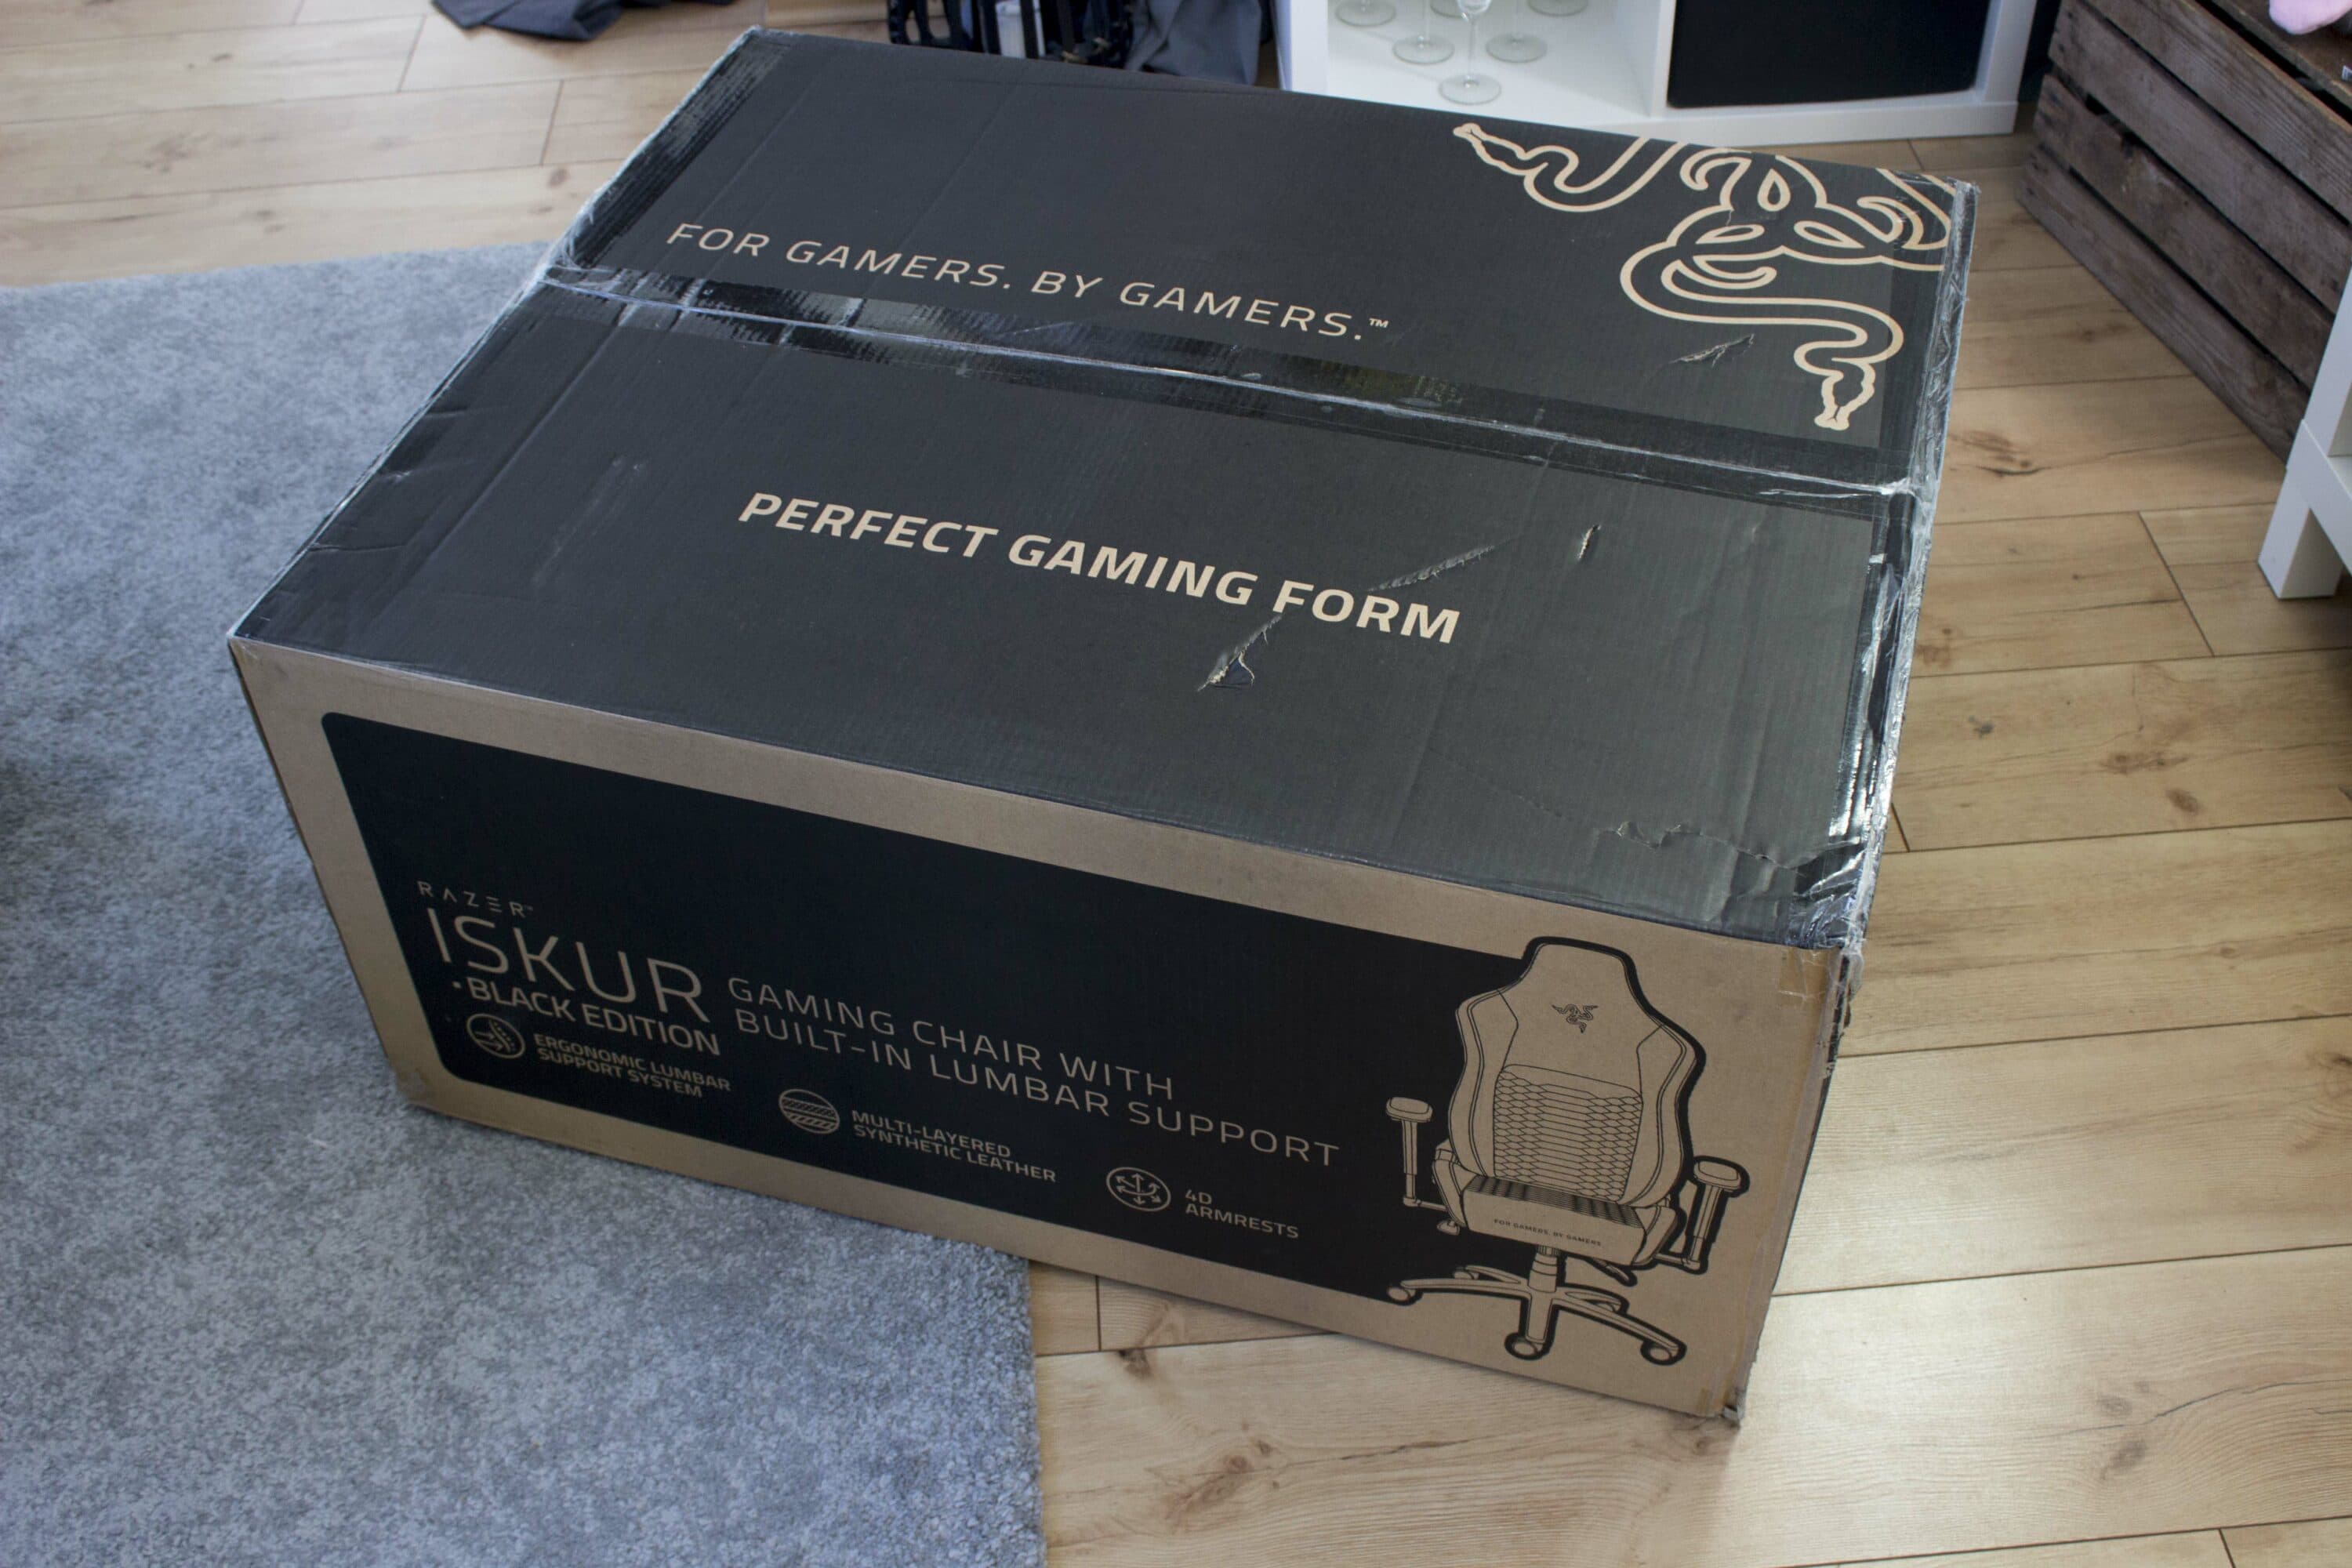 Razer Iskur in test: gaming chair with special features